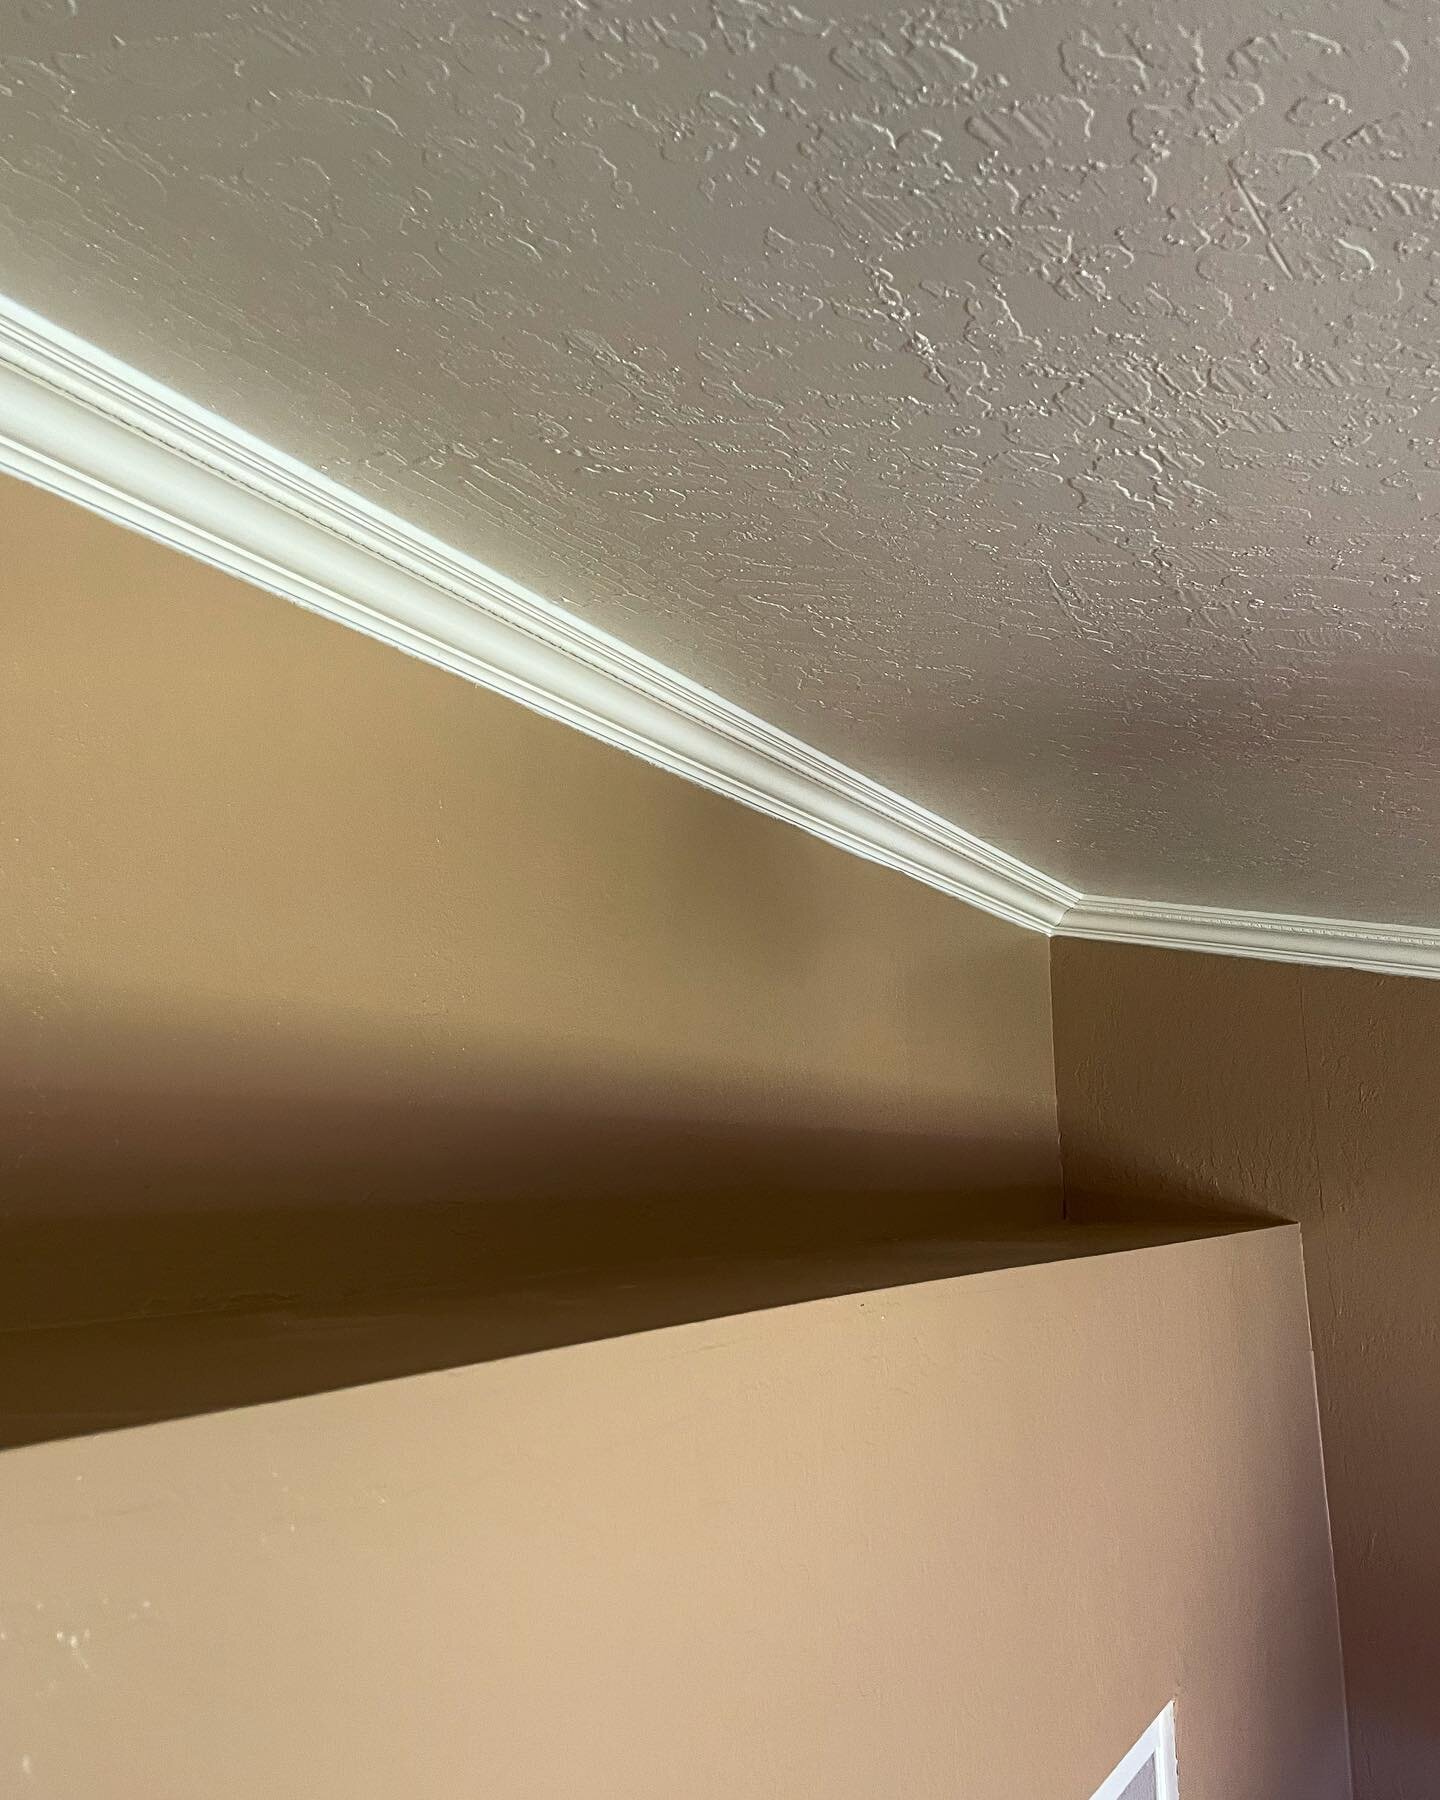 Crown molding installation on a vaulted ceiling. 🧼